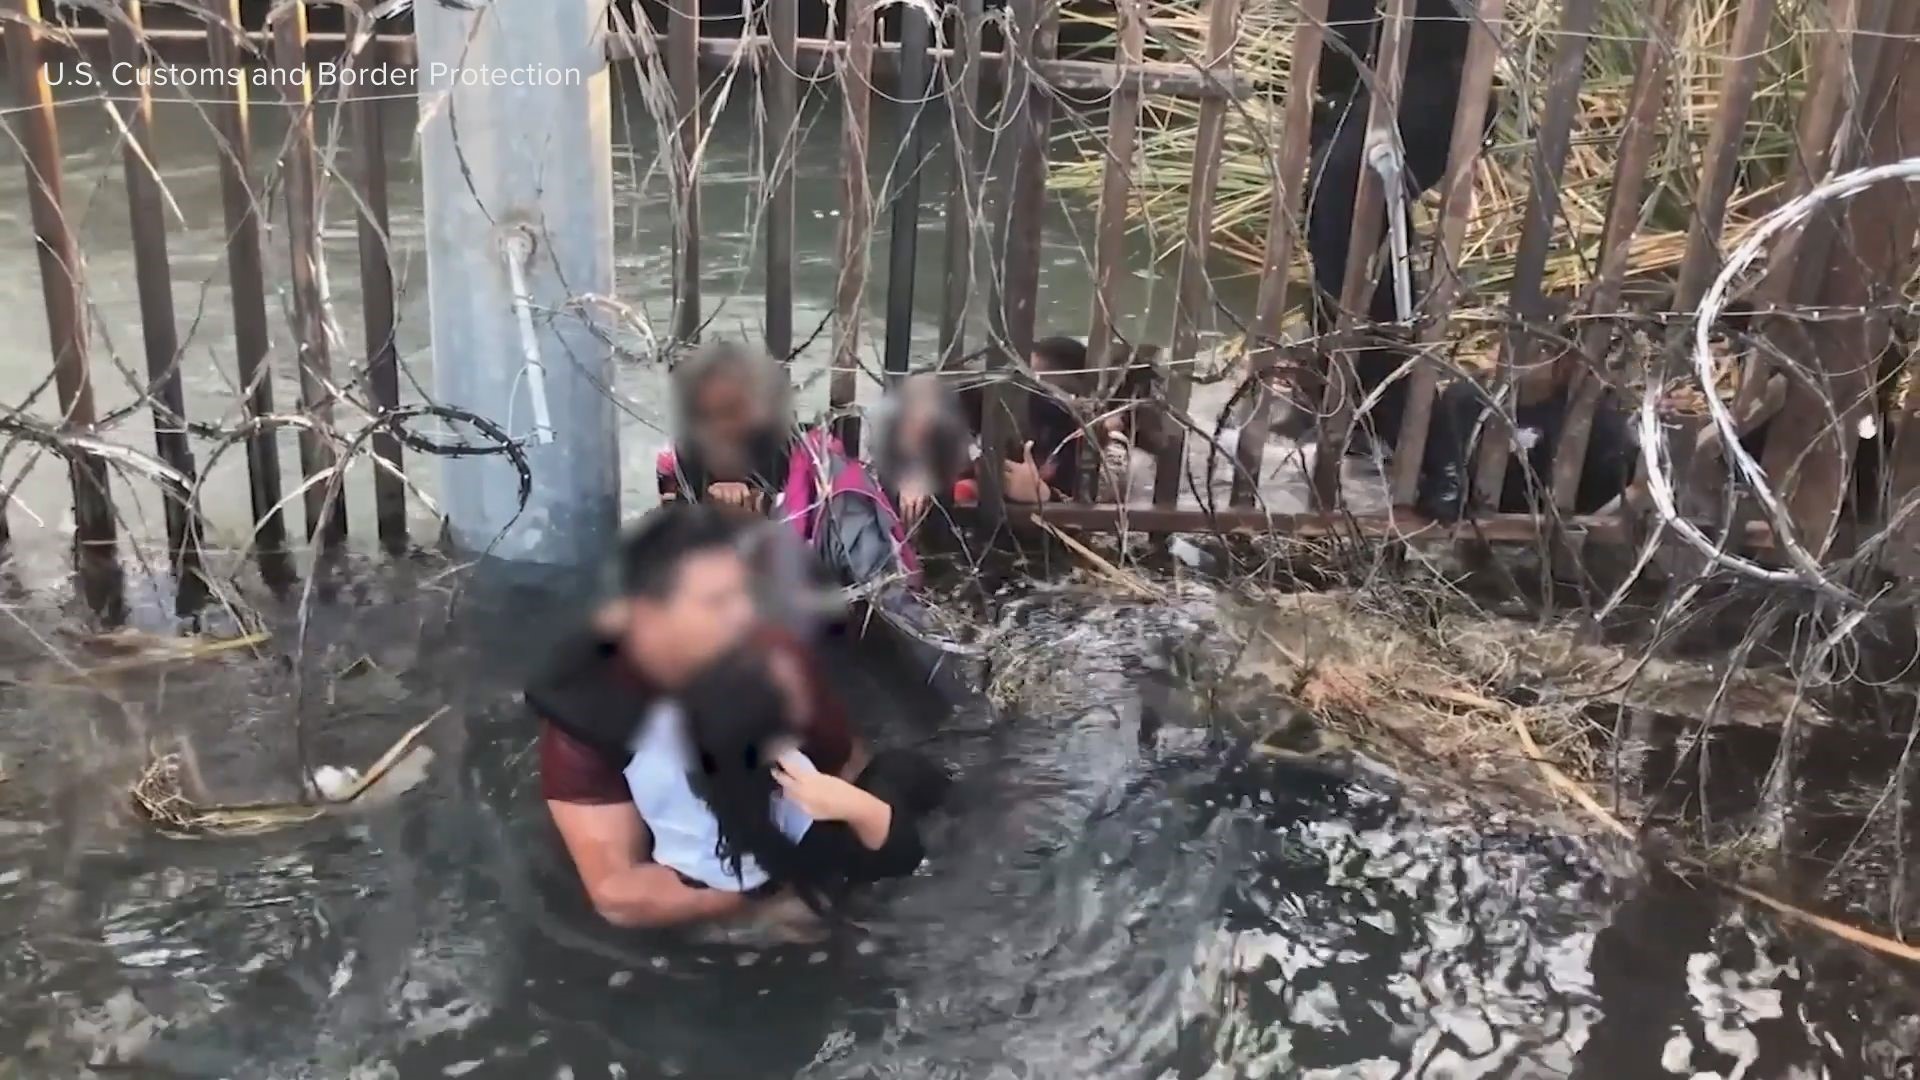 In the videos, migrant smugglers are seen pushing adults and children through holes under barriers and past large coils of razor wire at the border in Yuma, Arizona.